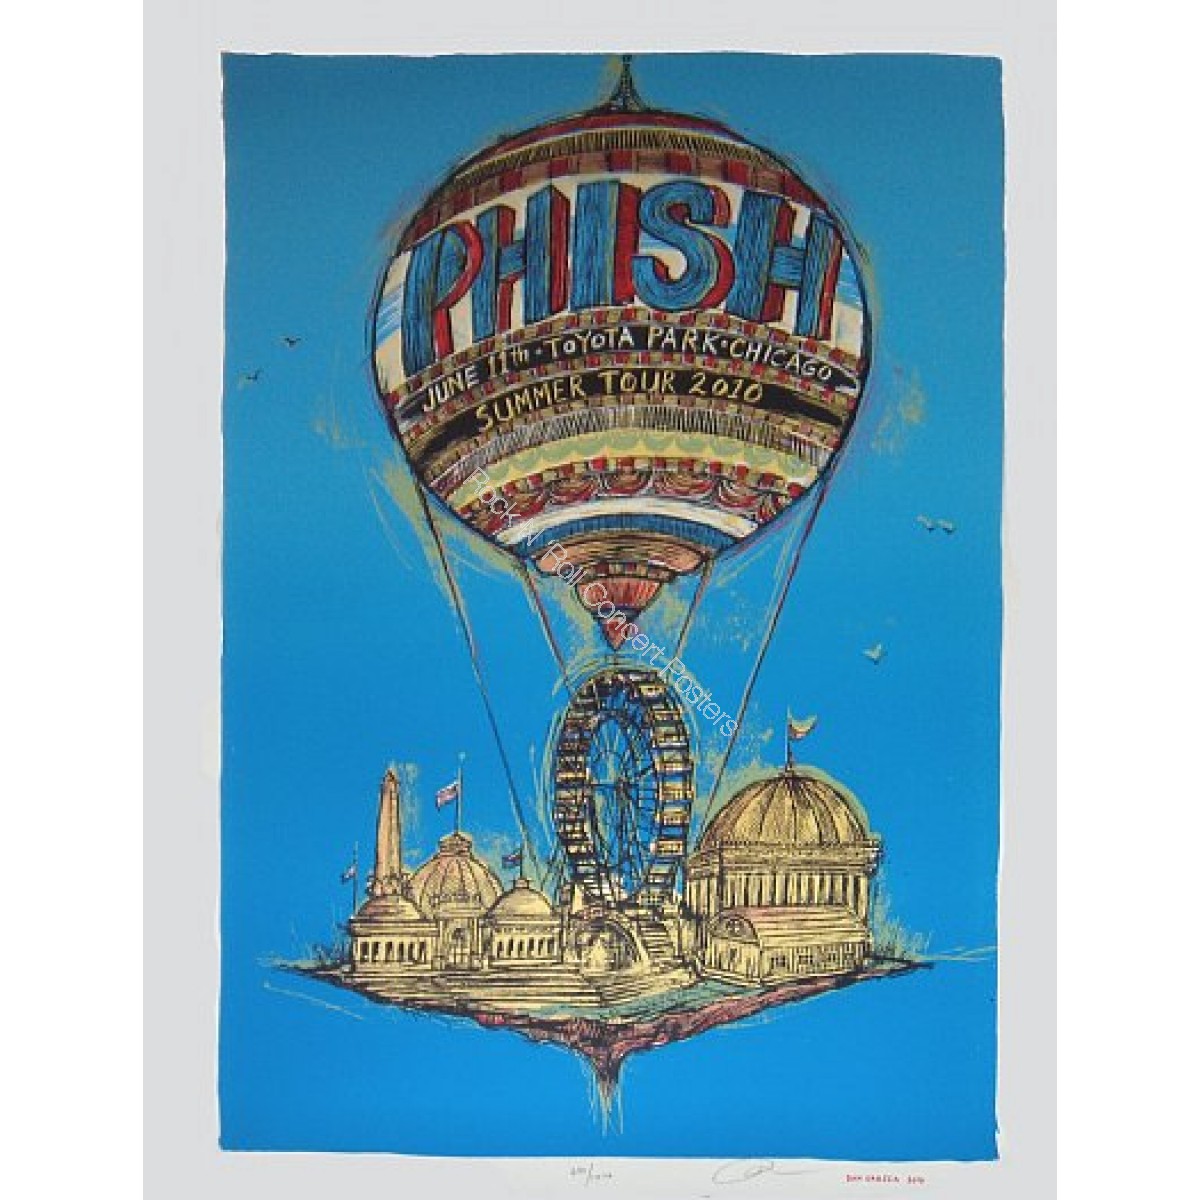 Phish @ Toyota Park Chicago IL. 6/11/10 Official 1st Edition Poster S/N edition of 1000 by Dan Grzeca